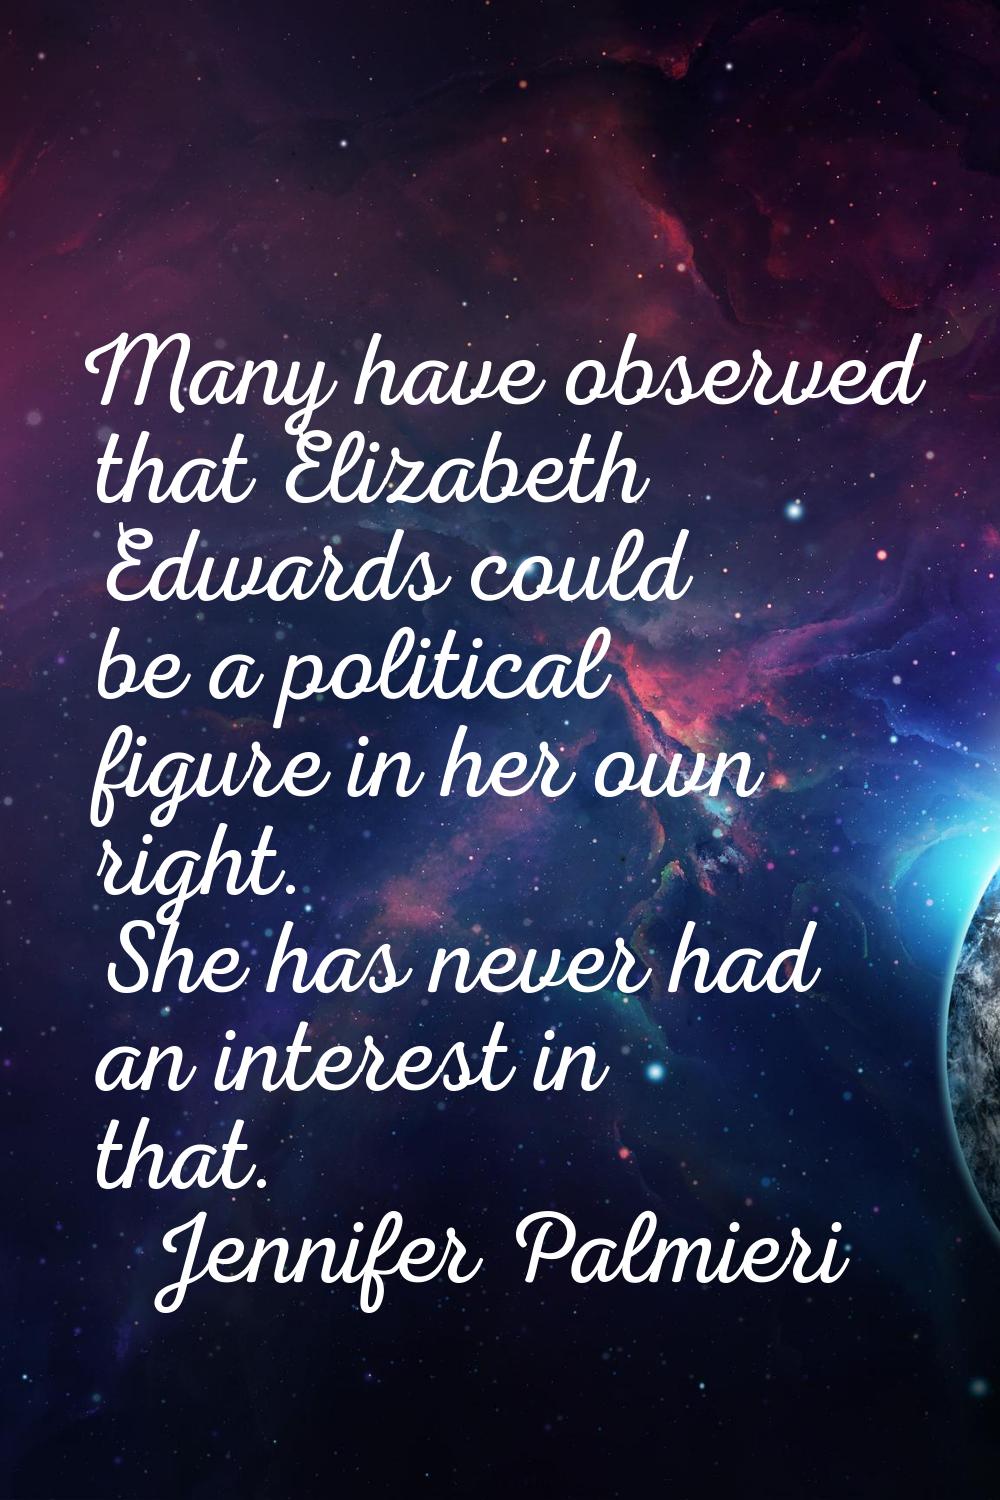 Many have observed that Elizabeth Edwards could be a political figure in her own right. She has nev